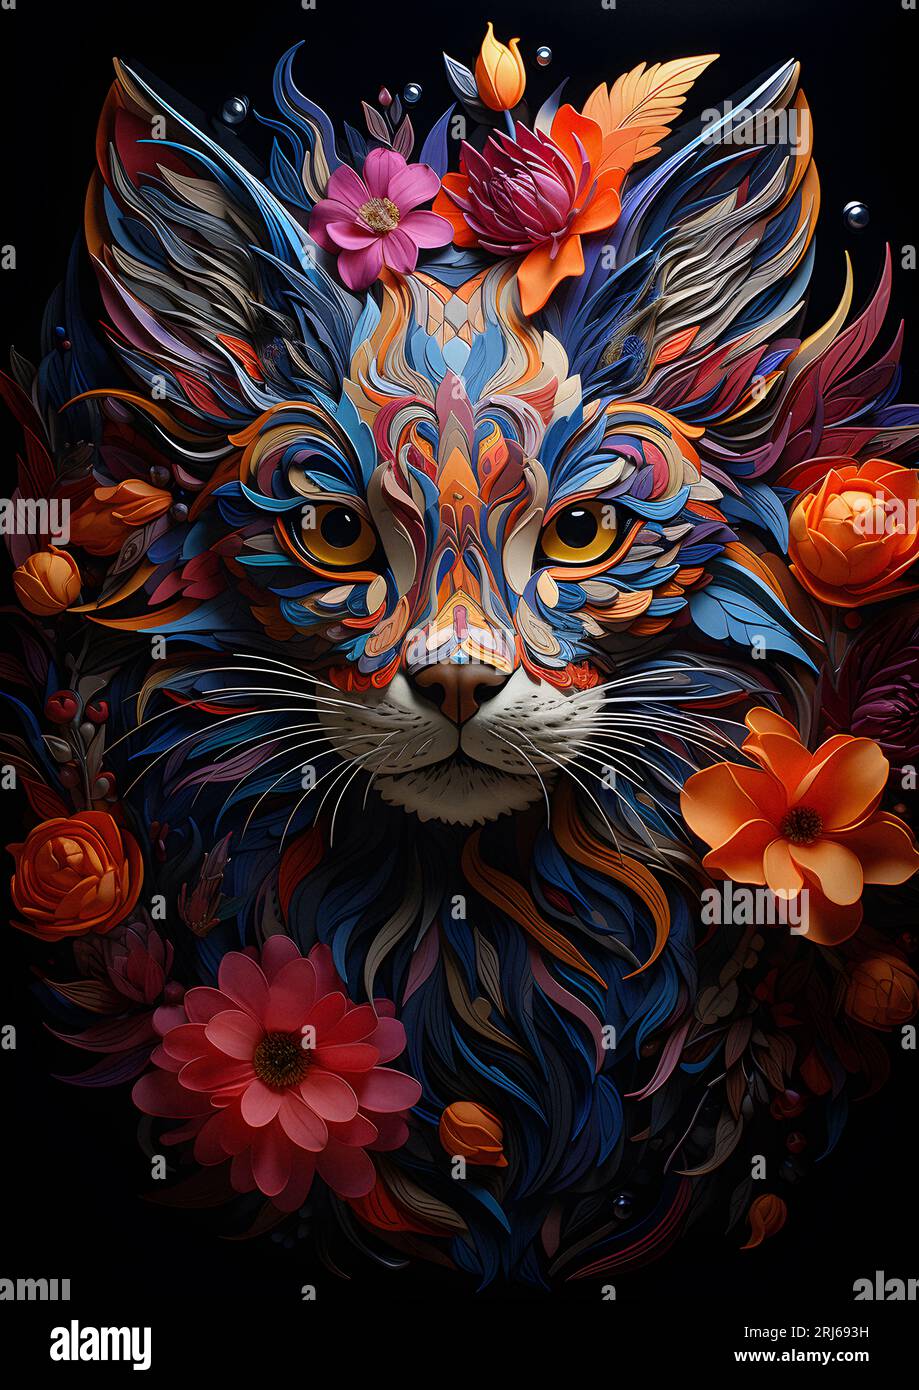 A vibrant psychedelic painting of a cat with bright eyes and a head Stock Photo